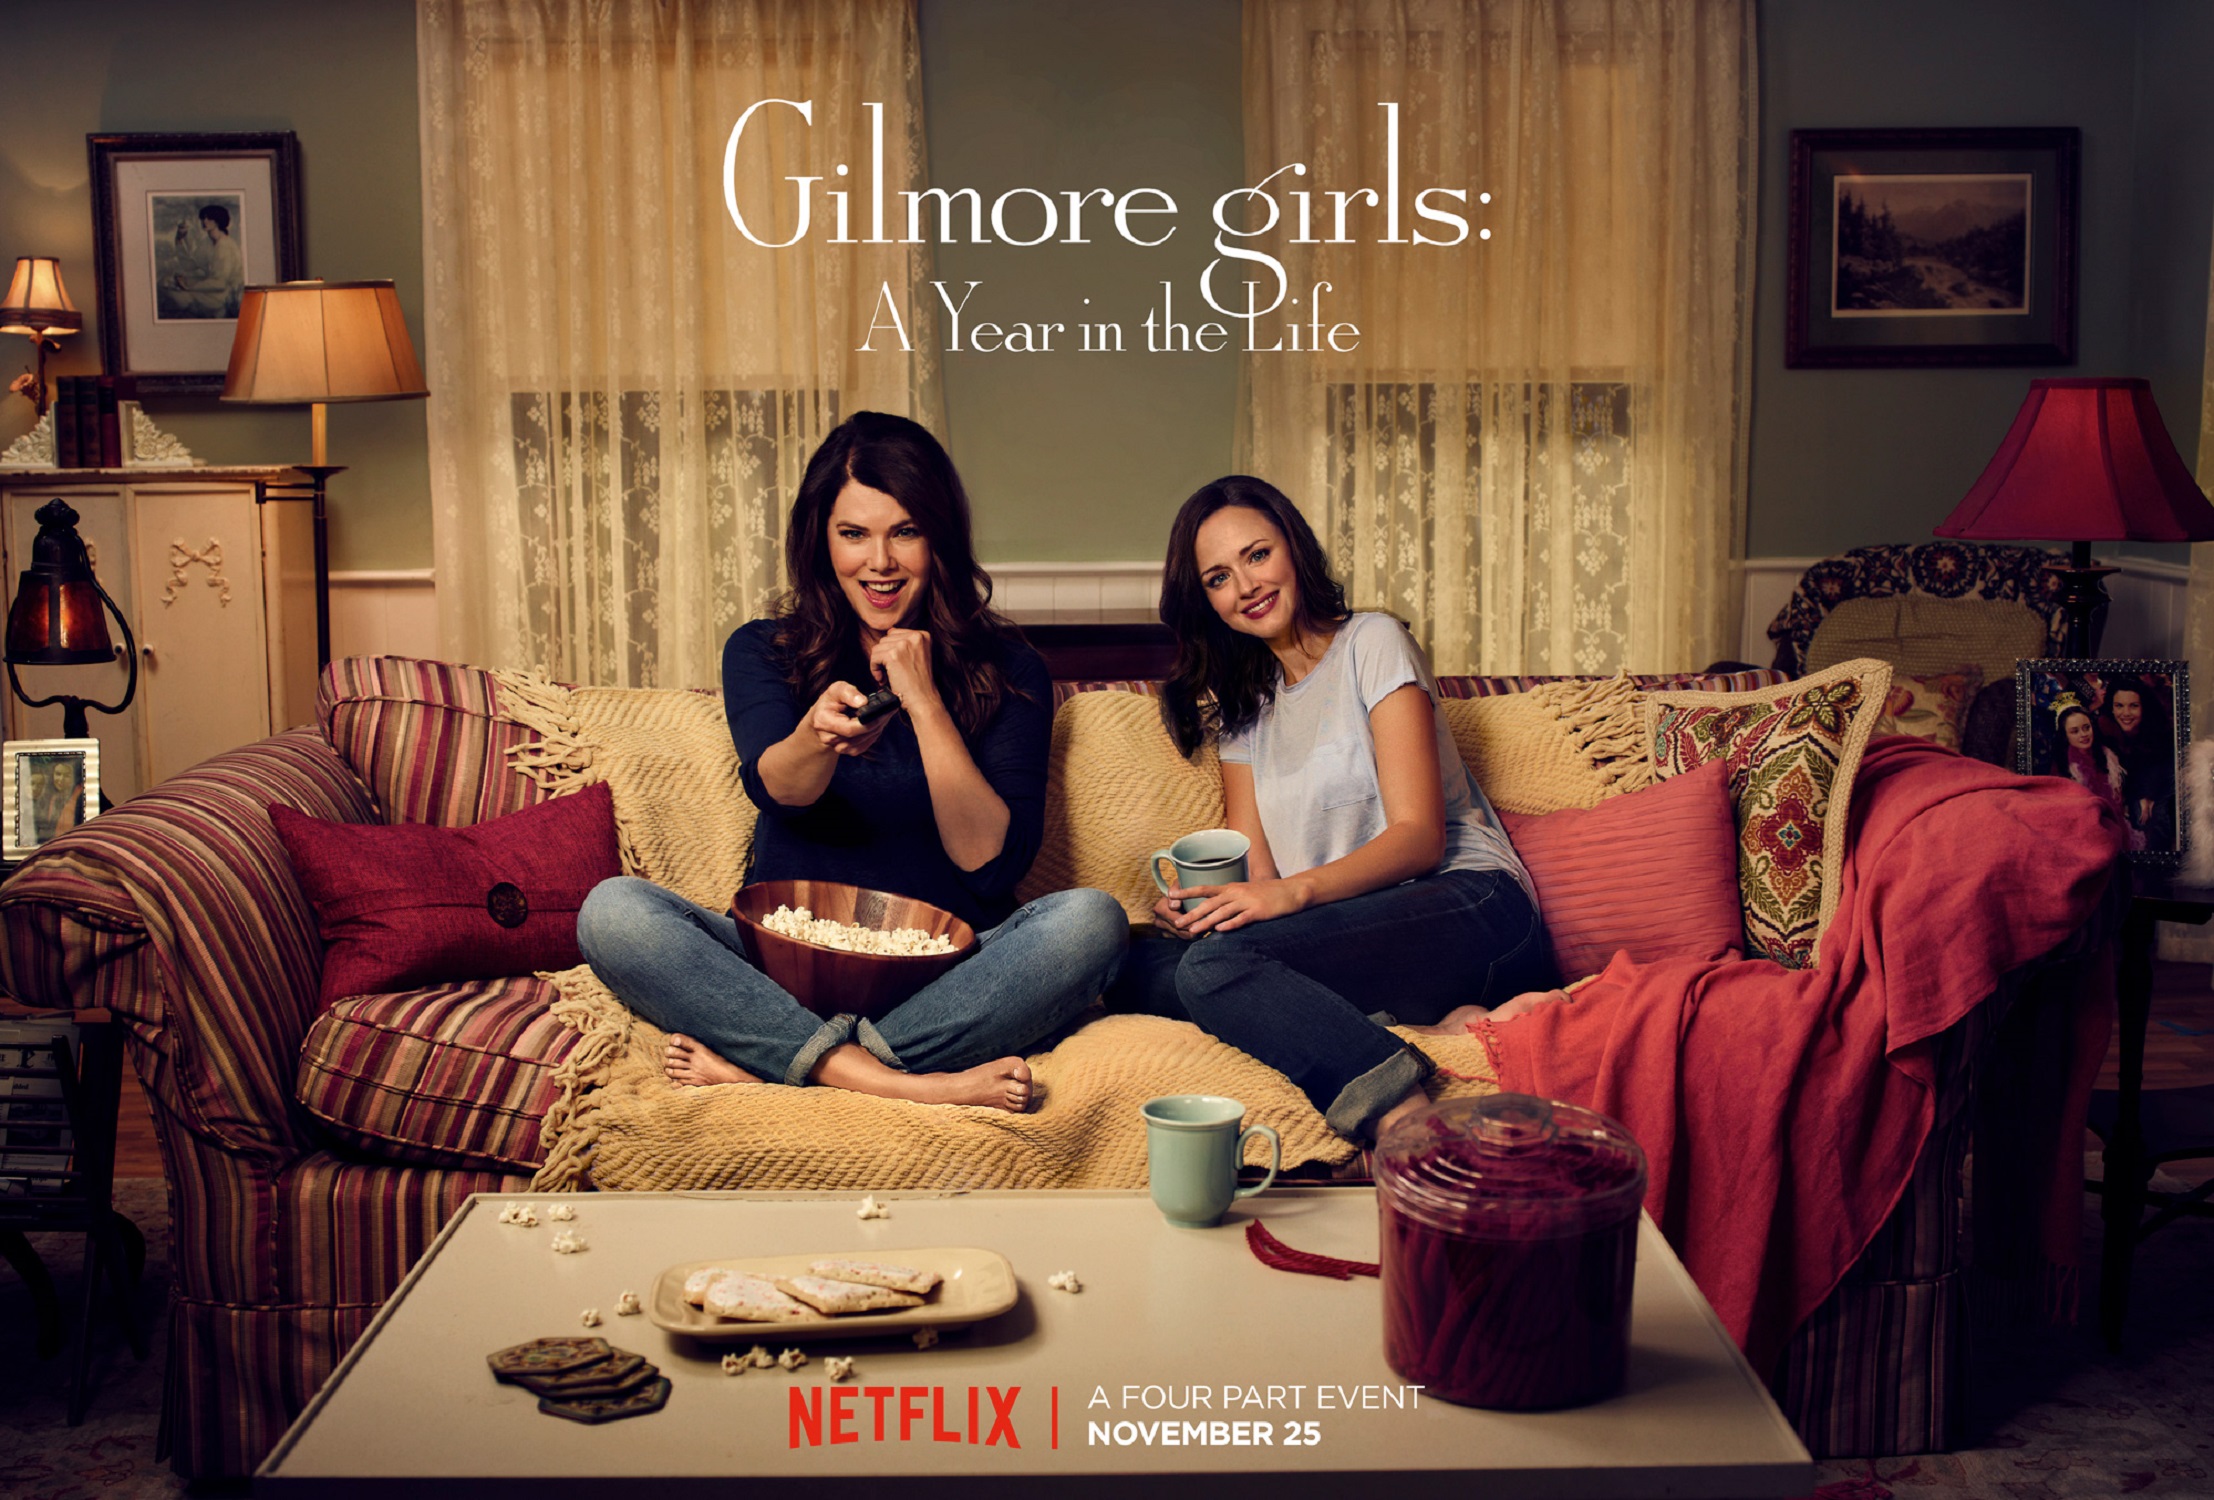 Promotional art for 'Gilmore Girls: A Year in the Life'